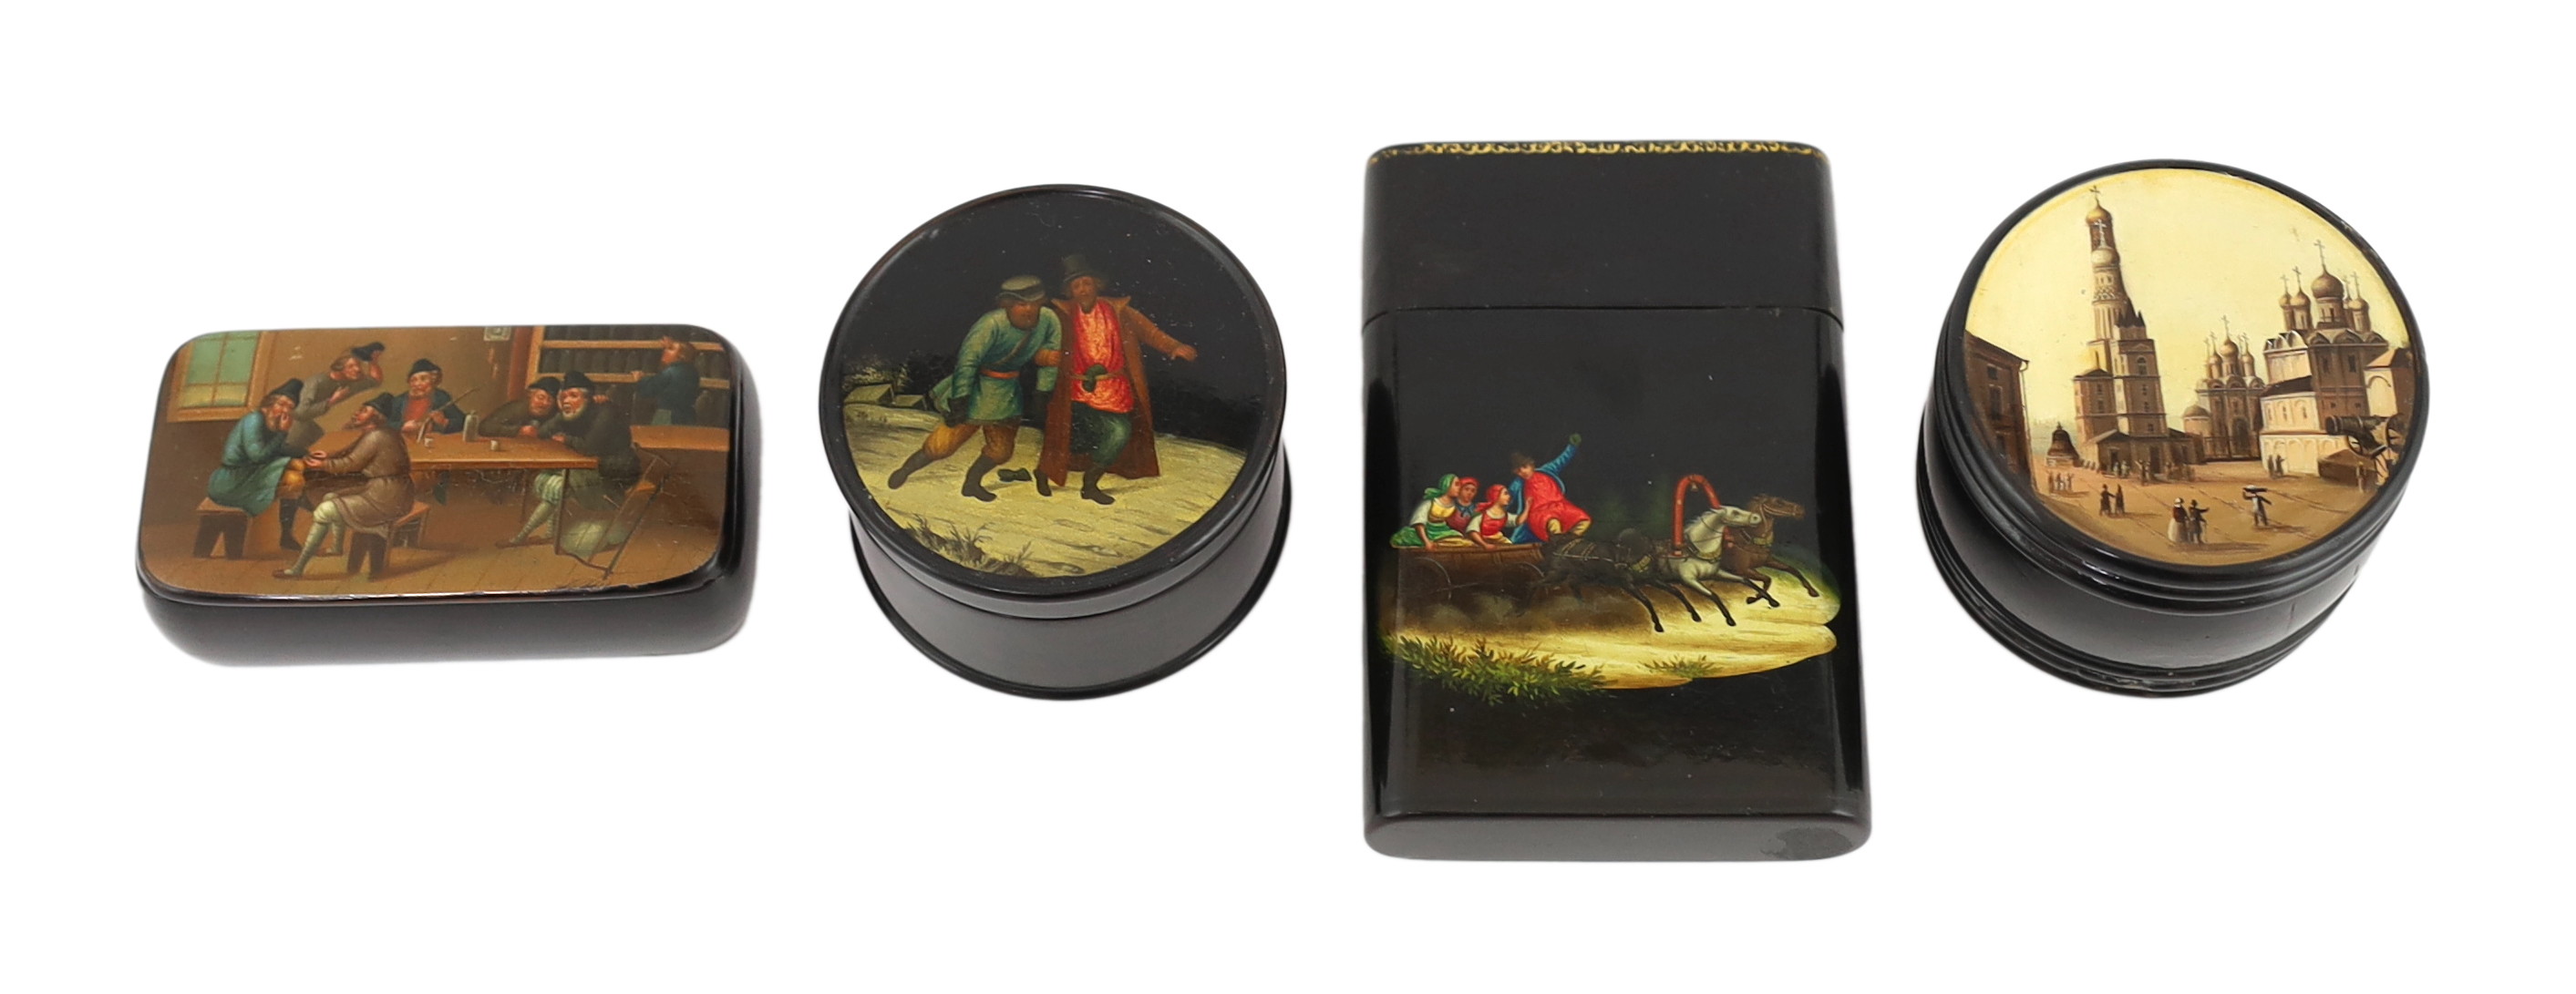 Four Russian lacquer boxes, by Lukutin, c.1840-60